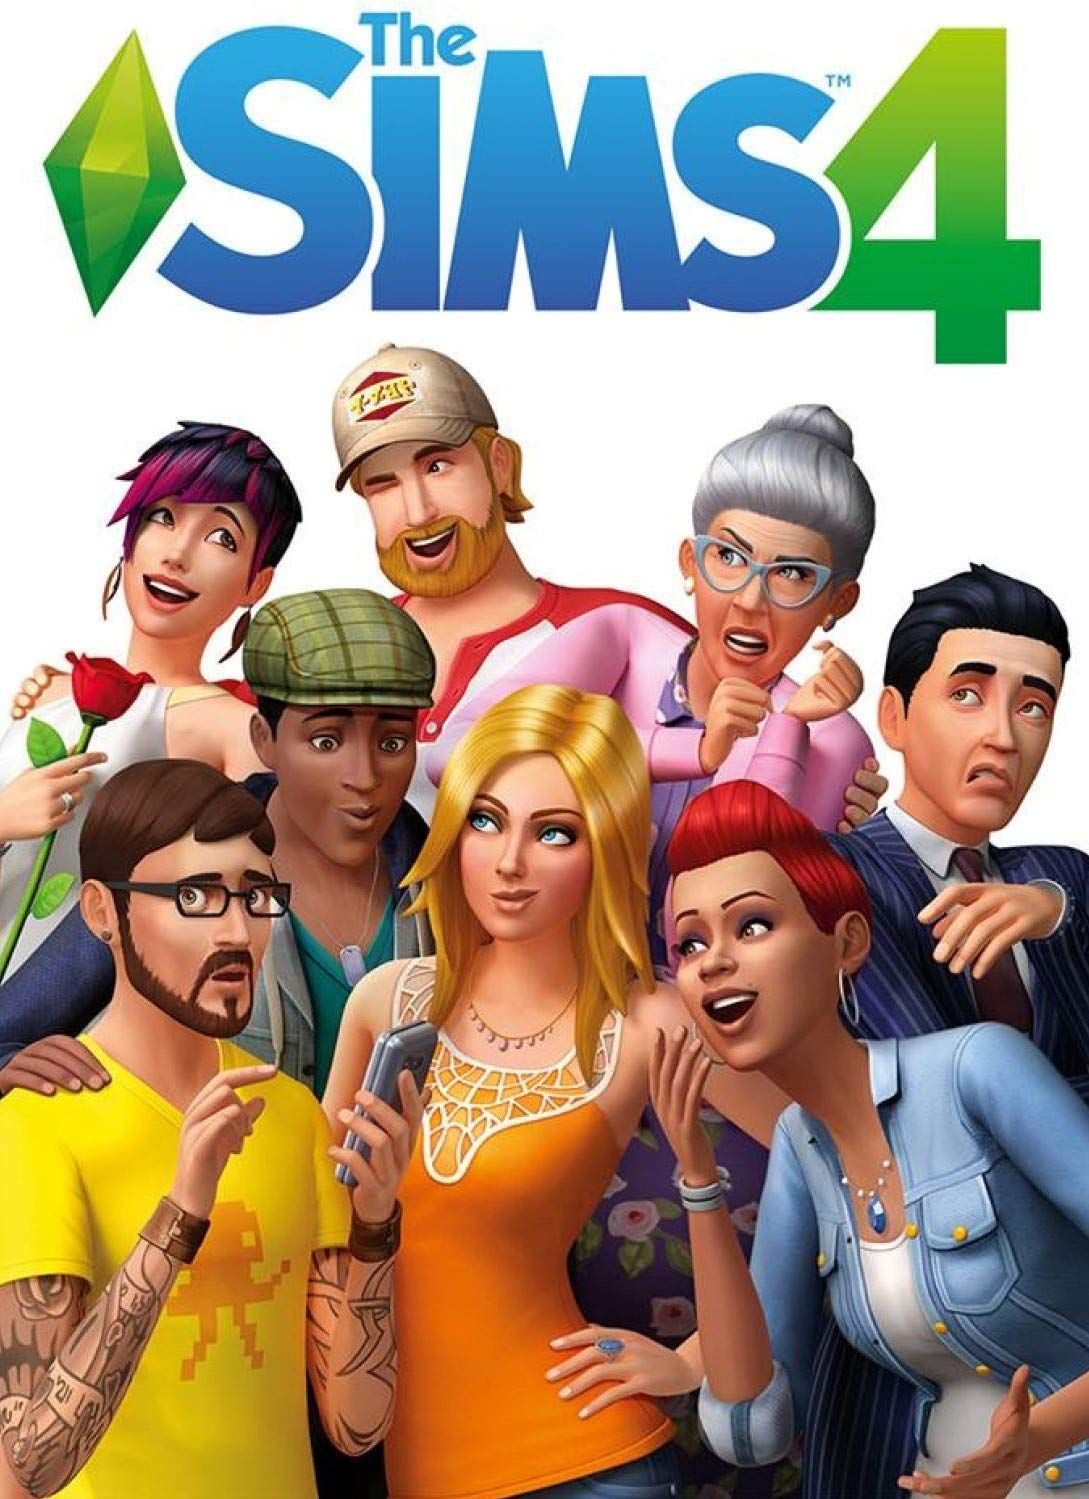 The Sims 4 cover art